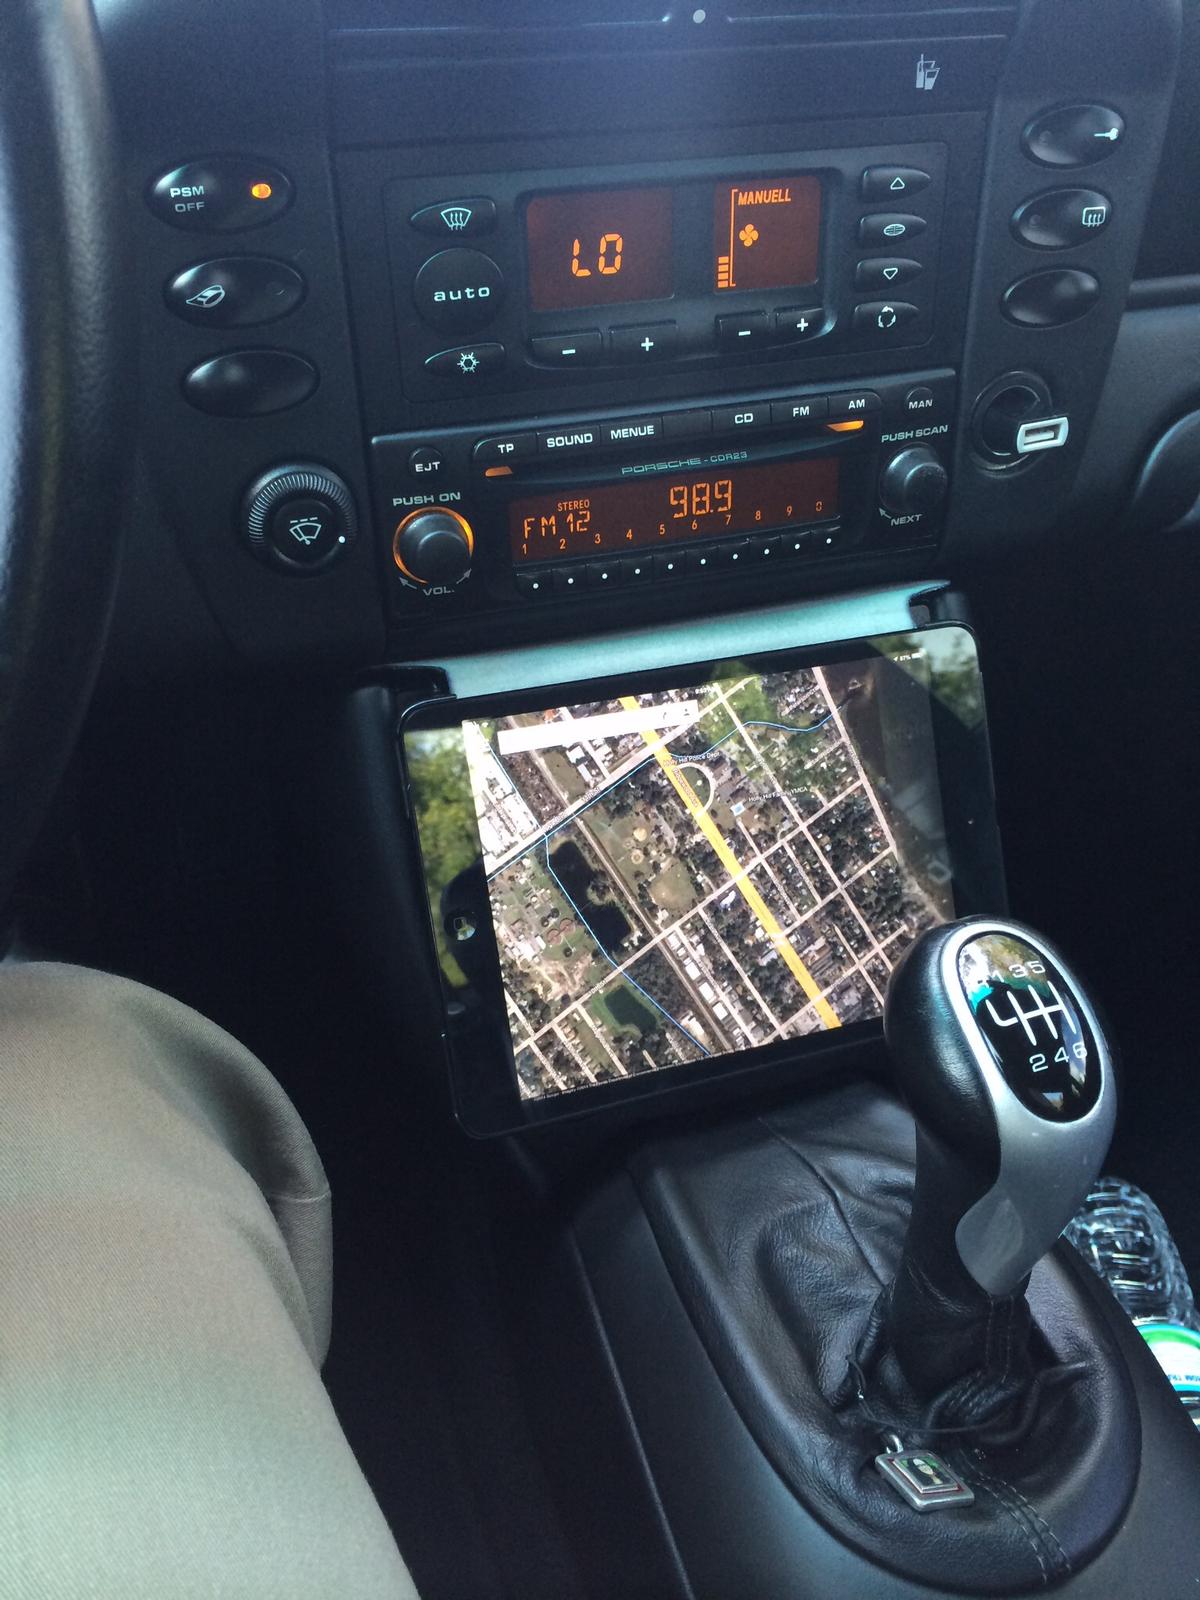 Bought iPad mini for GPS - In car holder? - Rennlist - Porsche Discussion  Forums